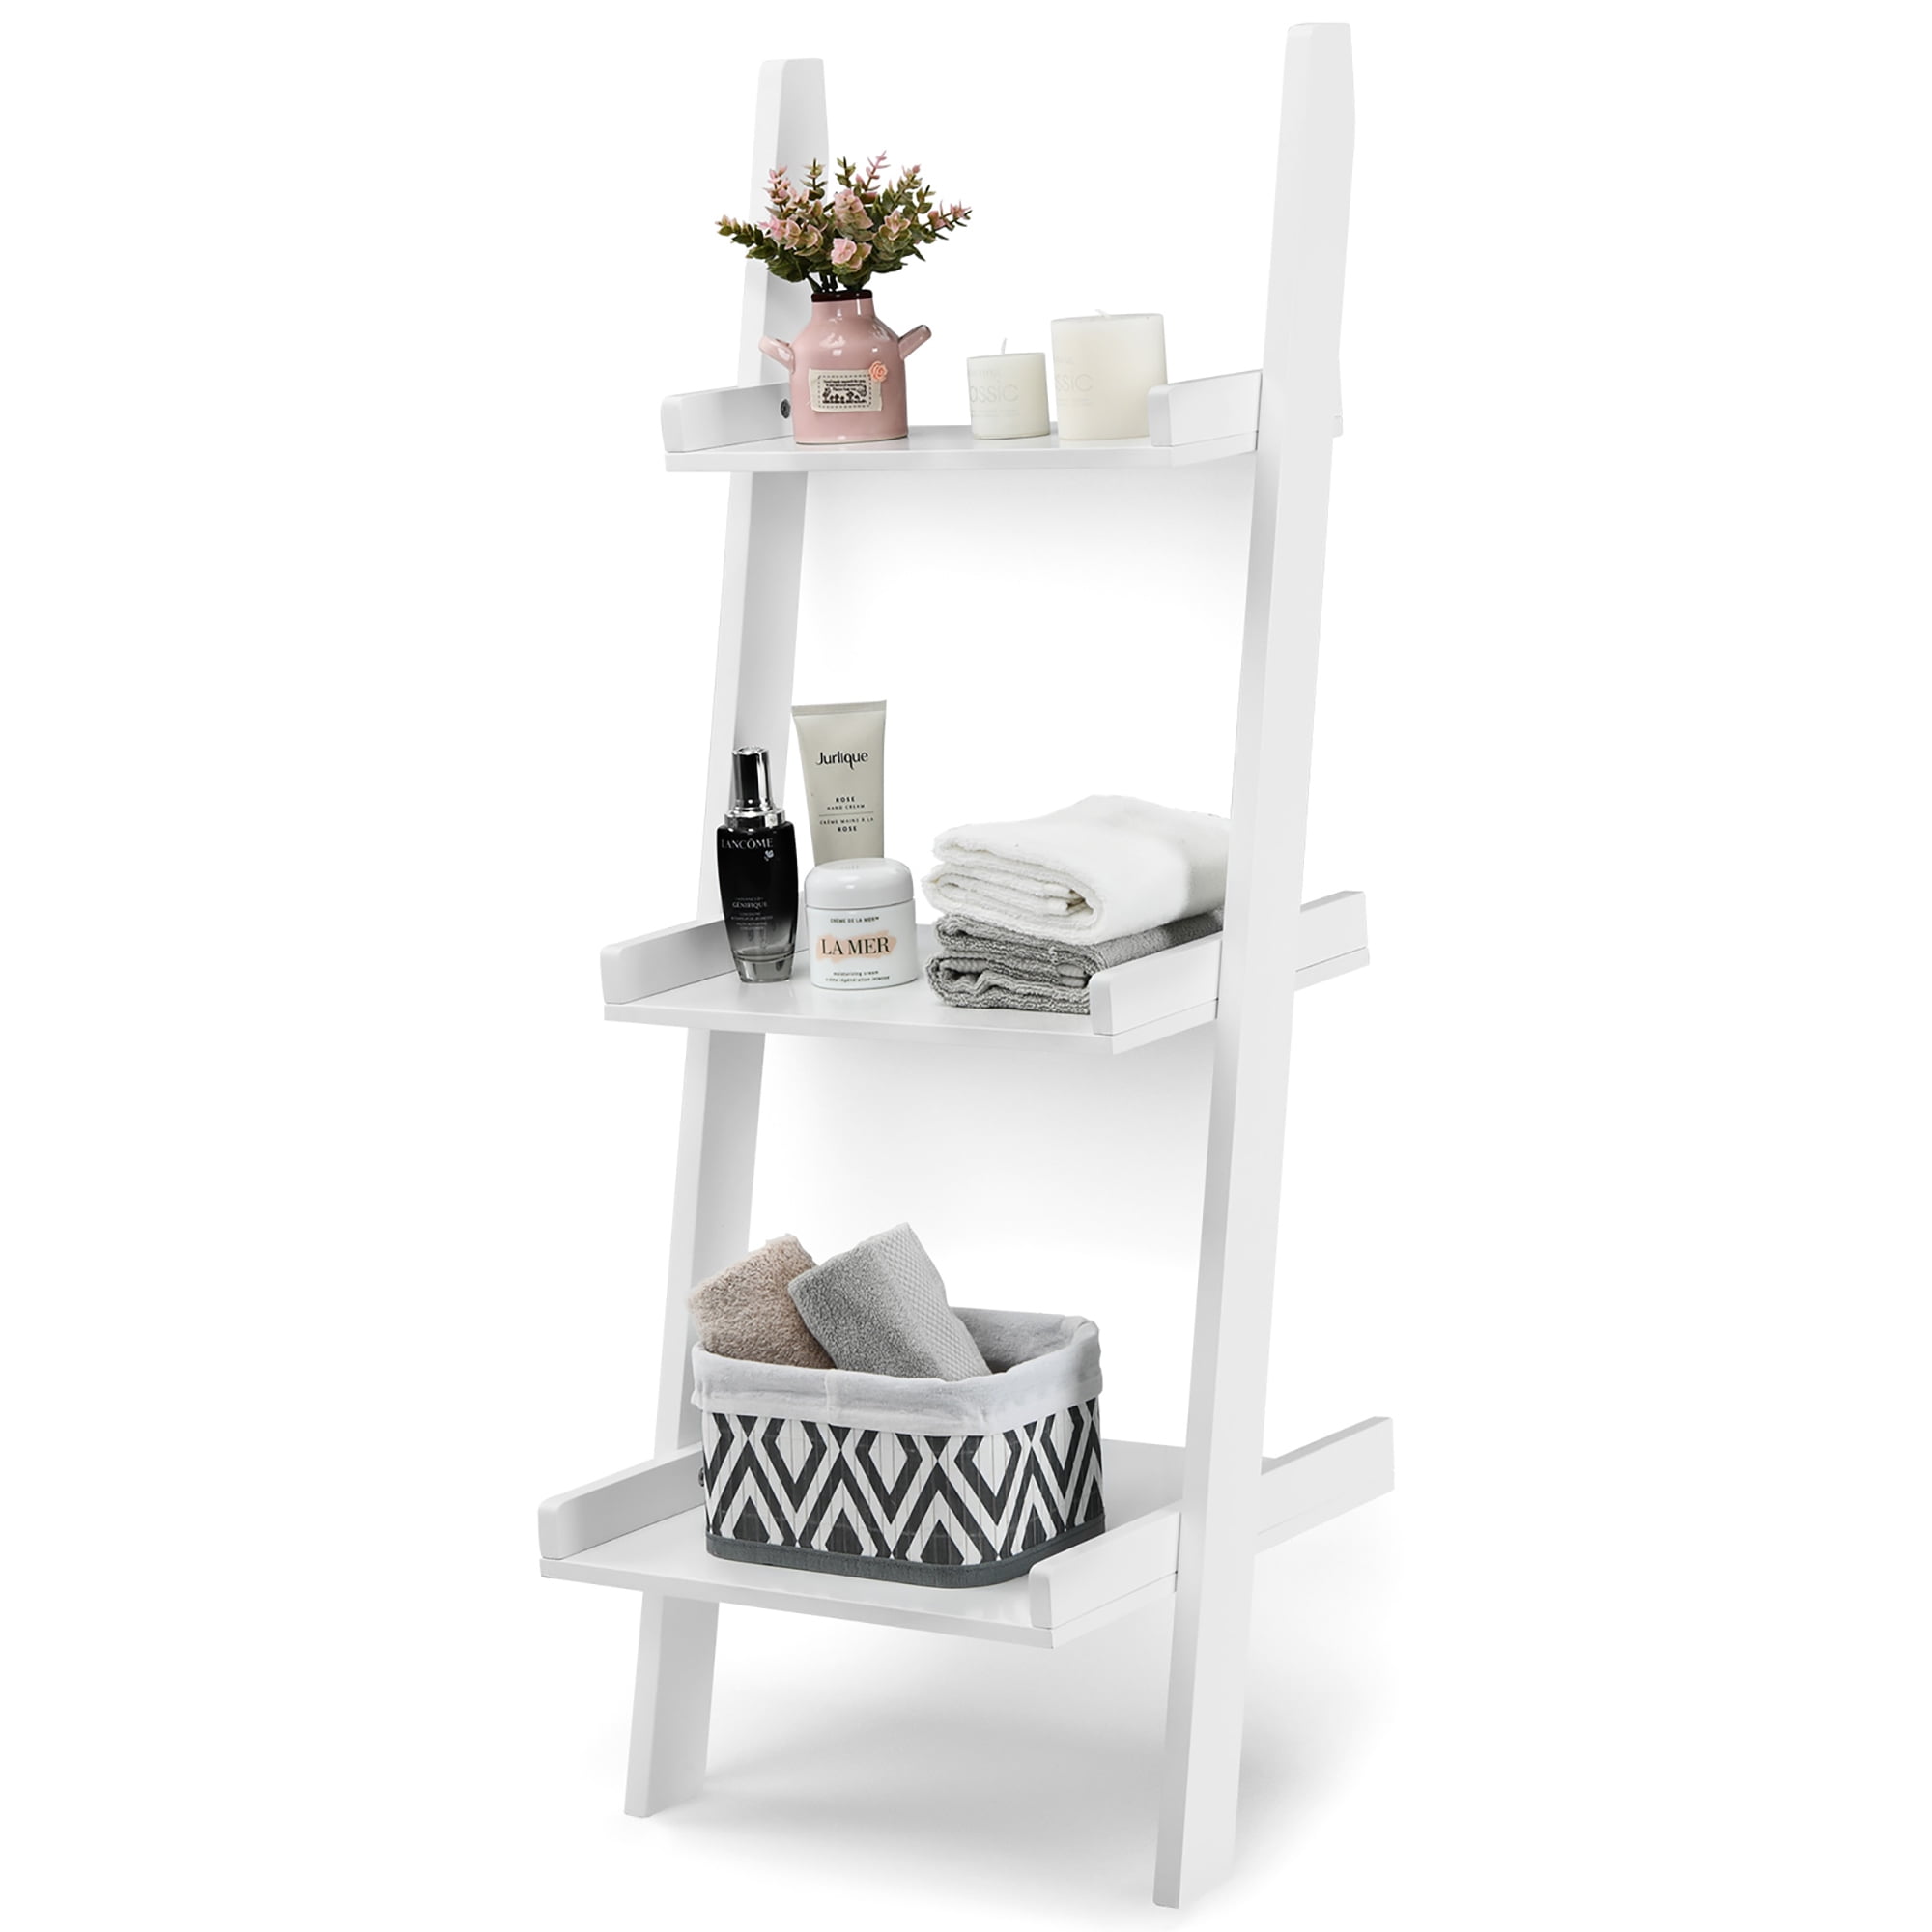 Details about   3-Tier Ladder Shelf Bookshelf Wall Plant Display Stand Storage Leaning 